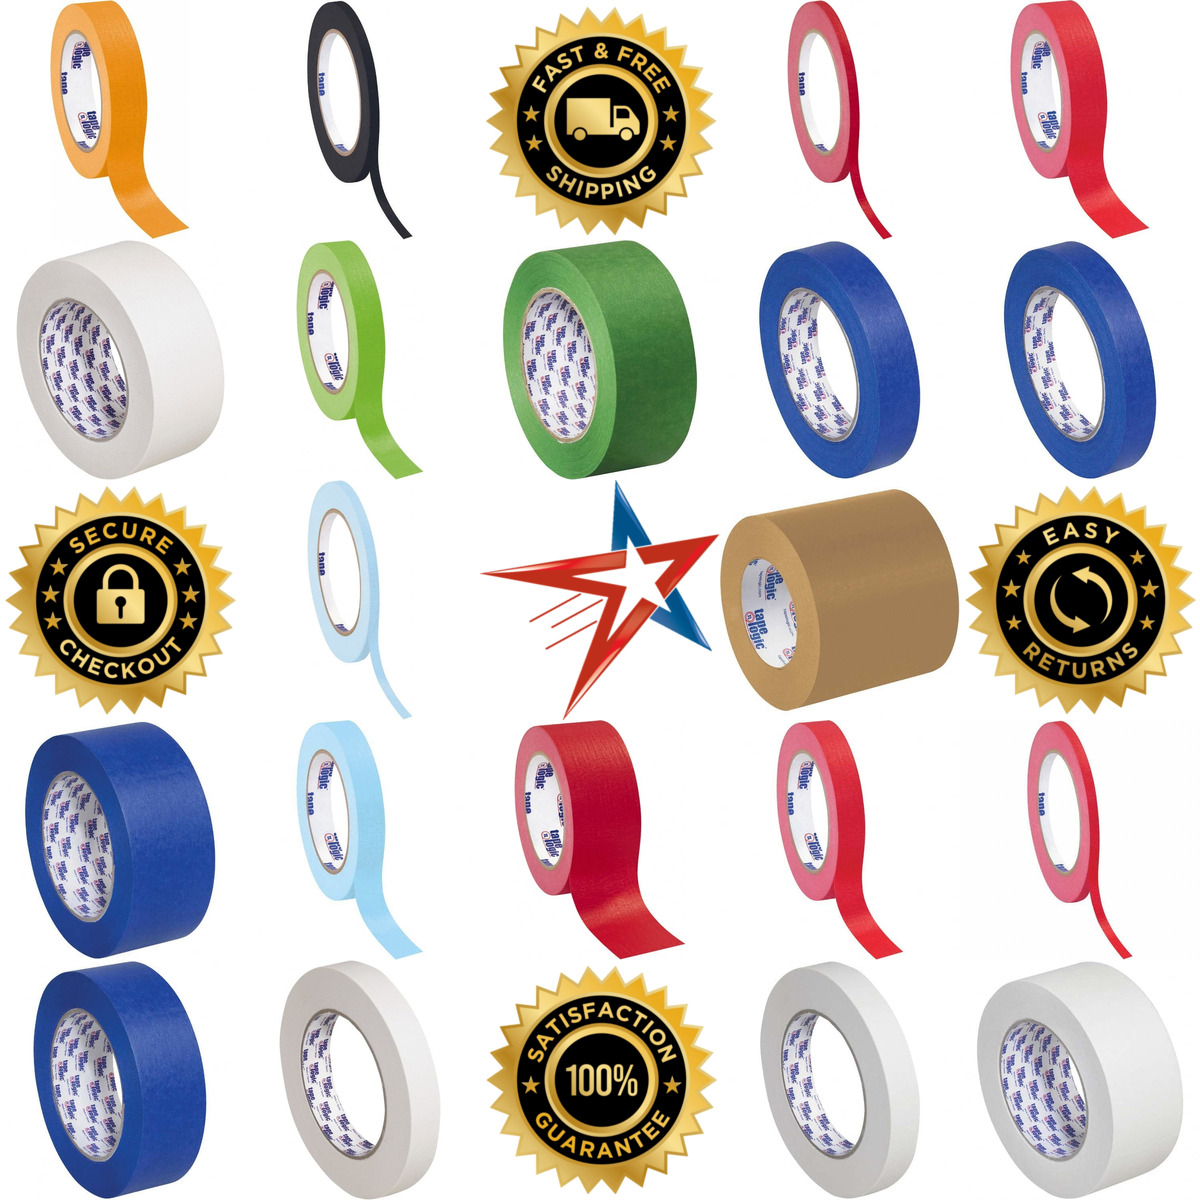 A selection of Tape Logic products on GoVets